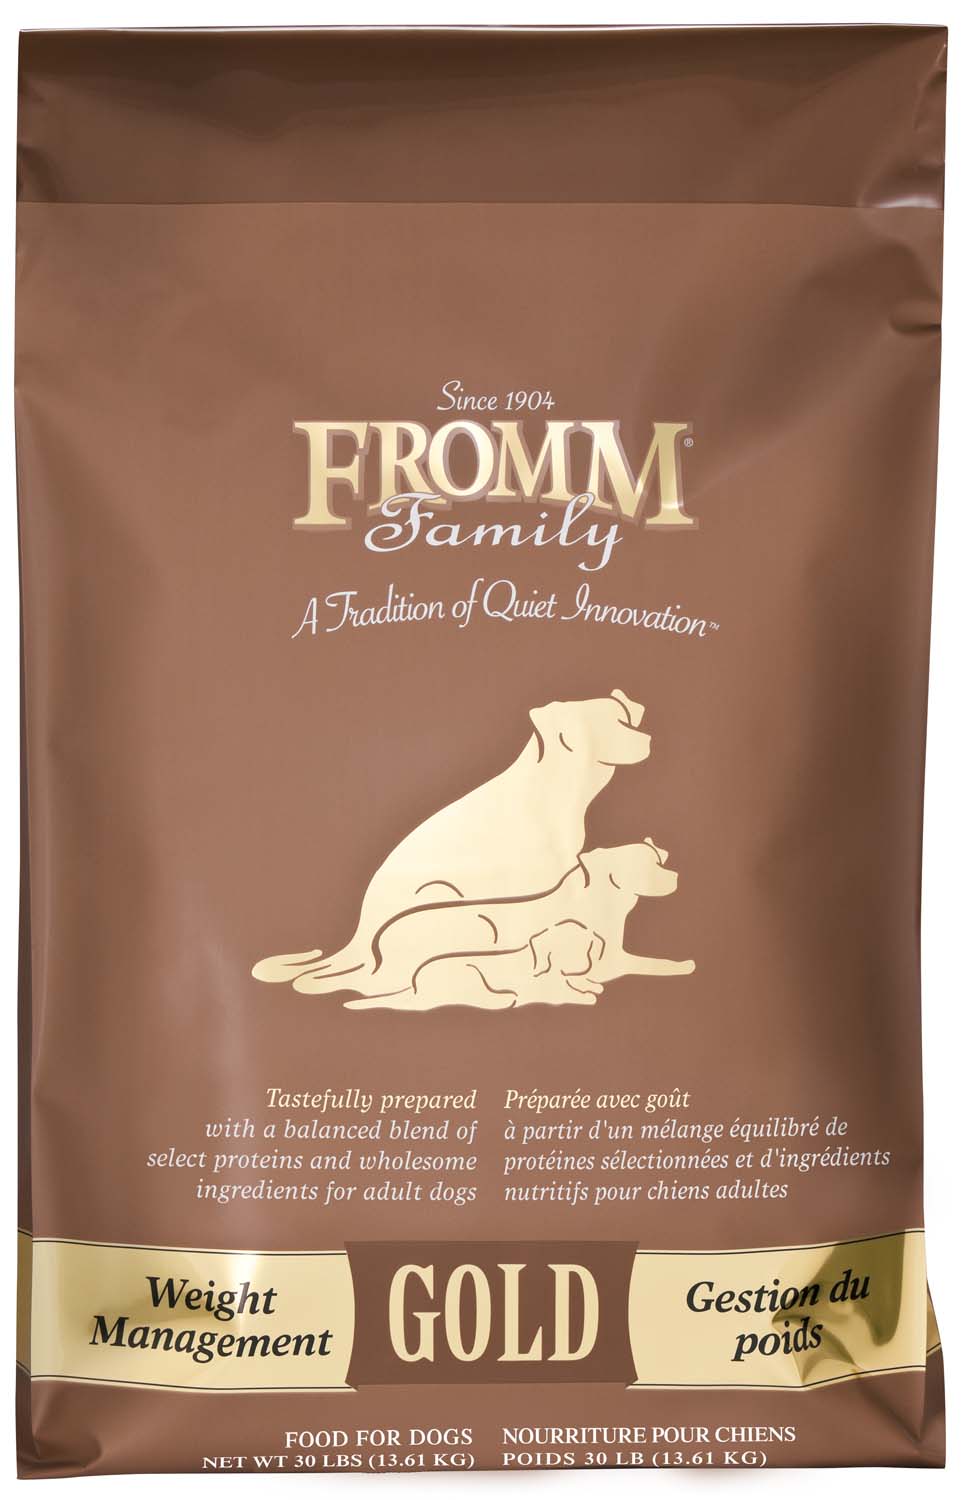 Fromm Family Weight Management Gold Food for Dogs, 30 lbs